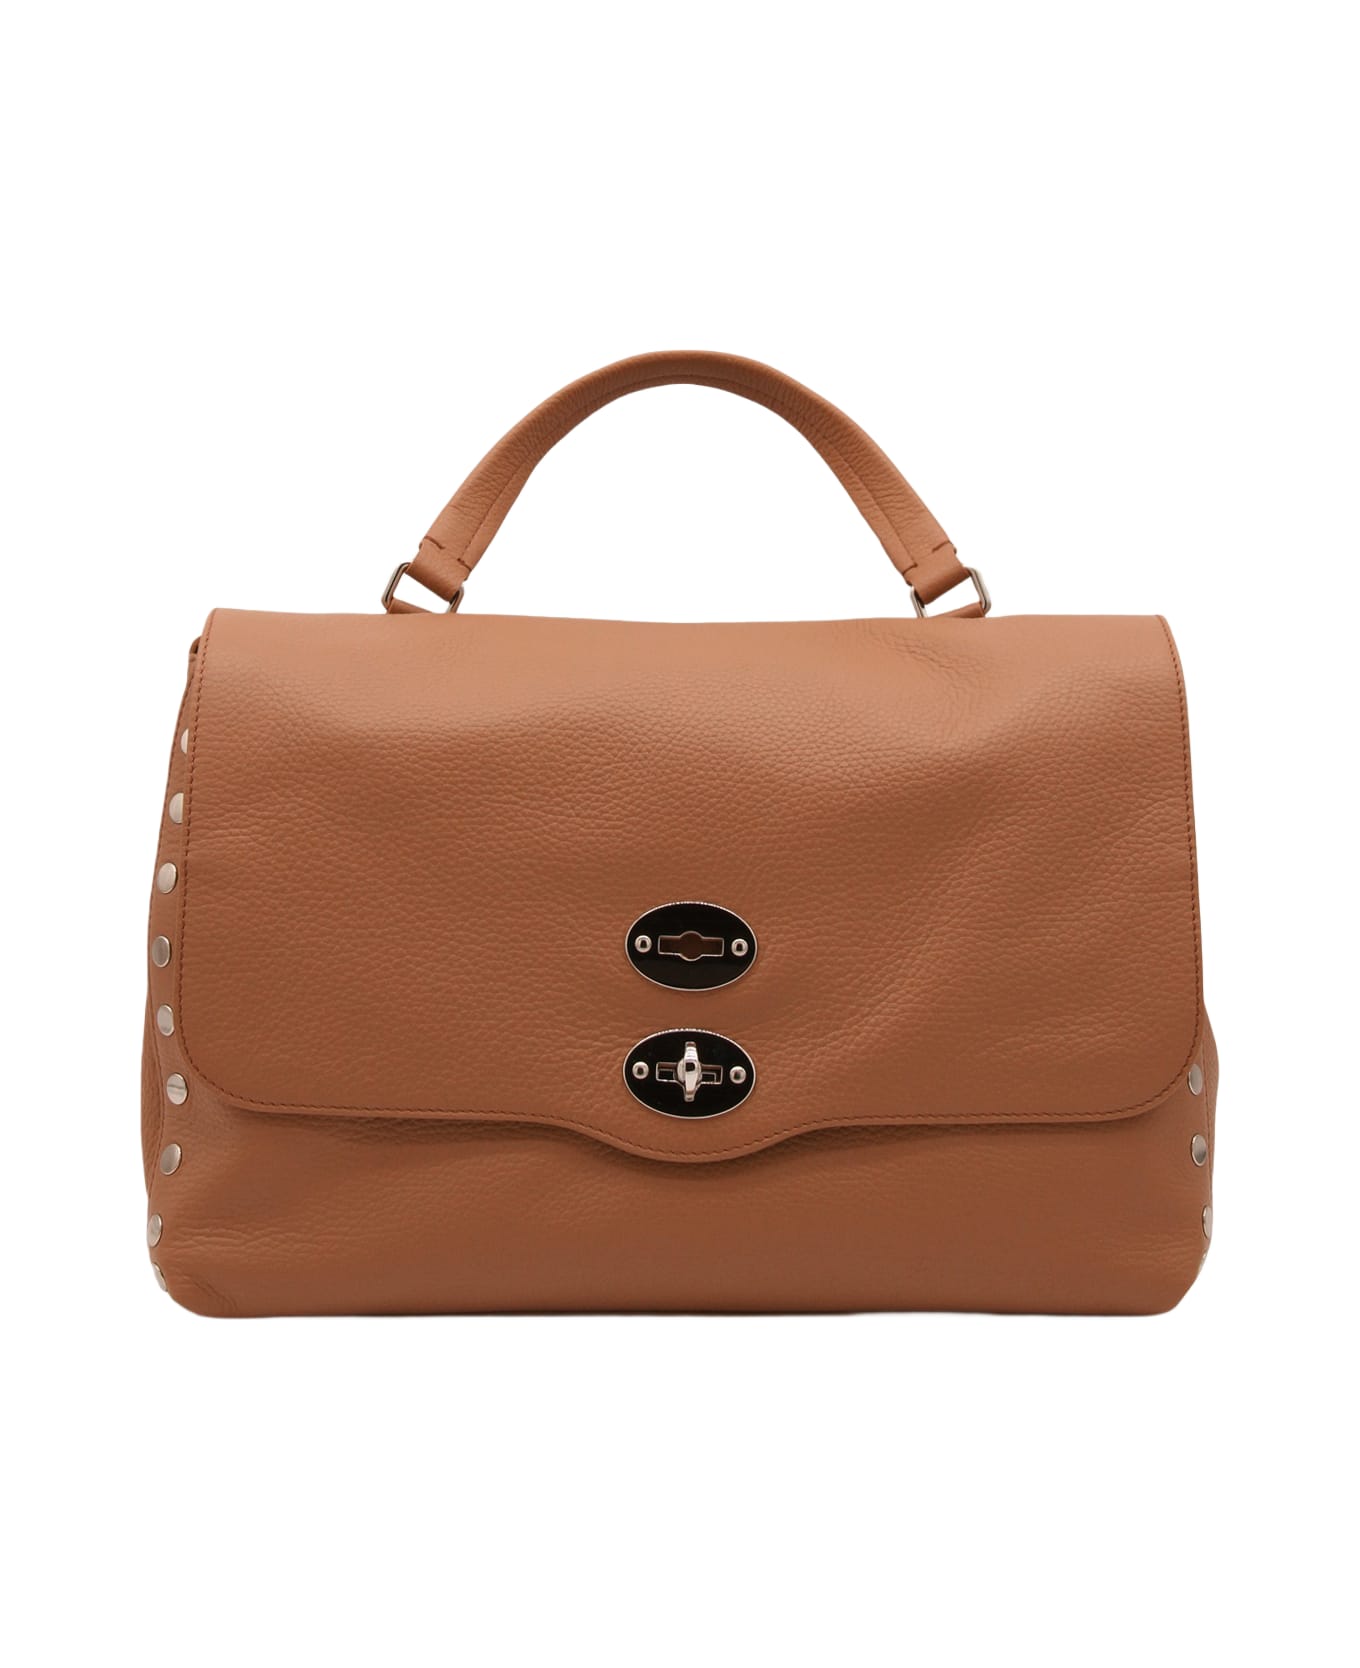 Zanellato Brown Leather Postine Day Top Handle Bag - Brown トートバッグ